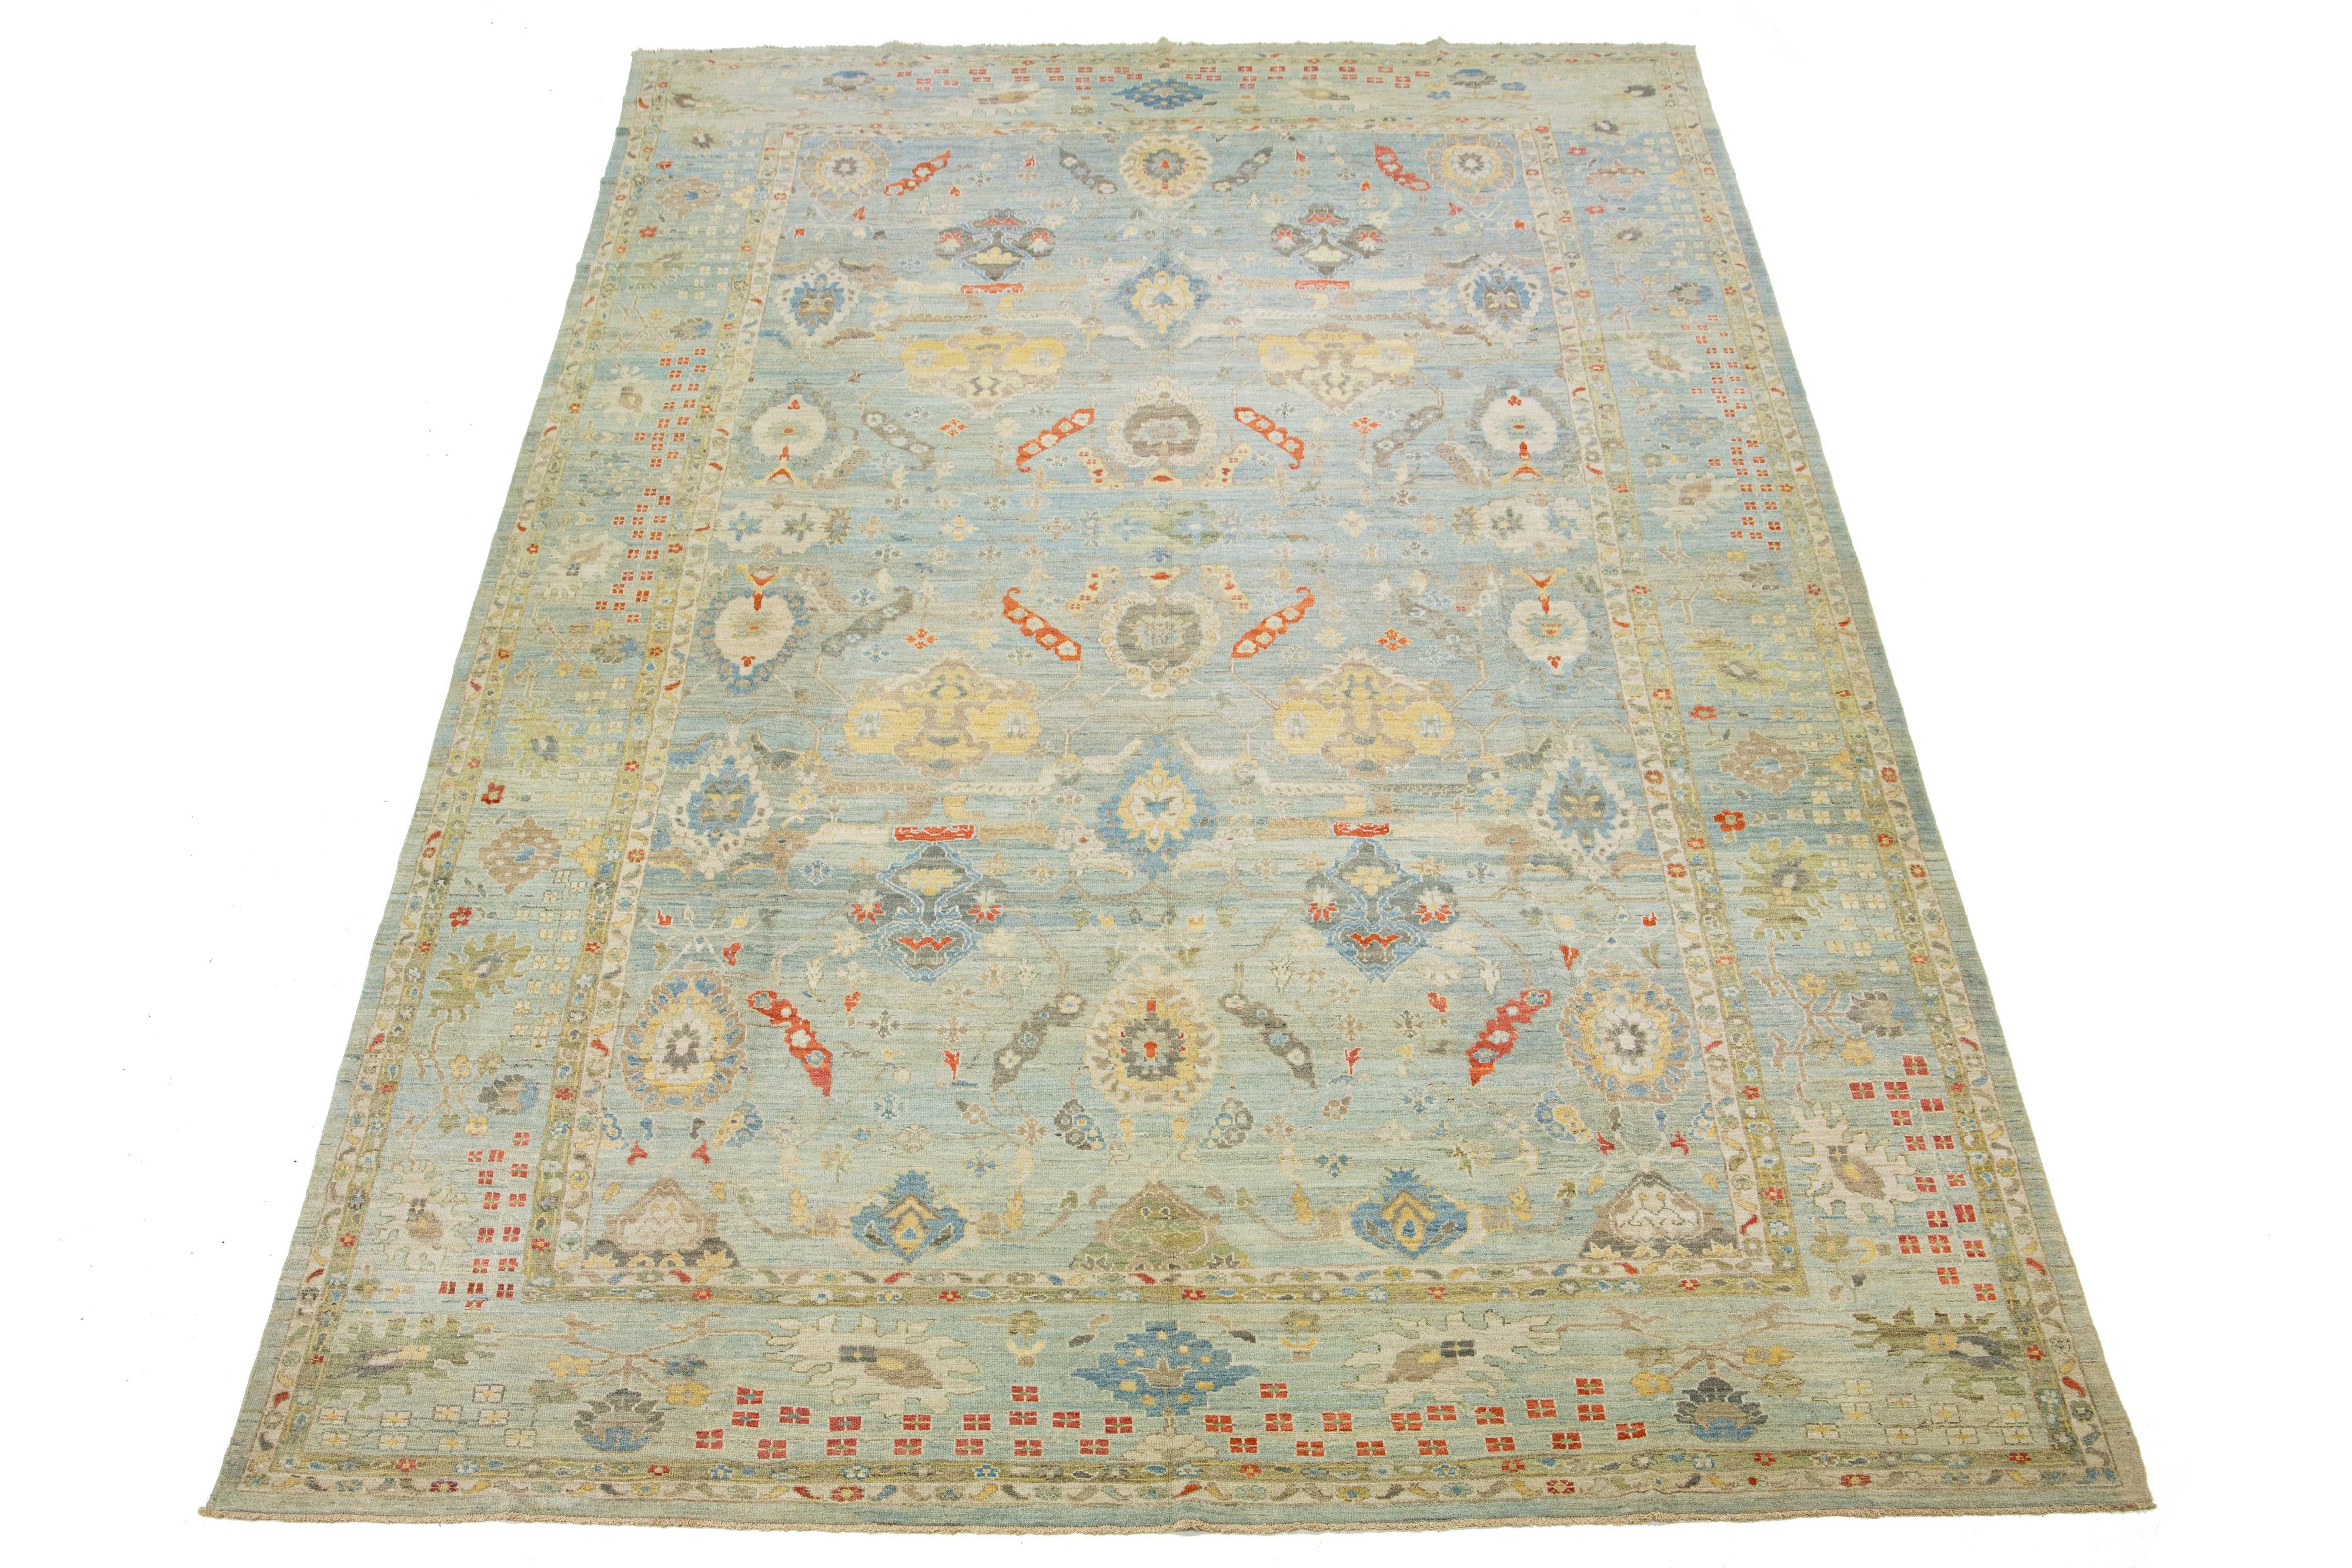 Beautiful modern Sultanabad hand-knotted wool rug with a blue field. This Sultanabad rug has a designed frame and multicolor accents in a gorgeous classic floral pattern.

This rug measures 13' x 21'.

